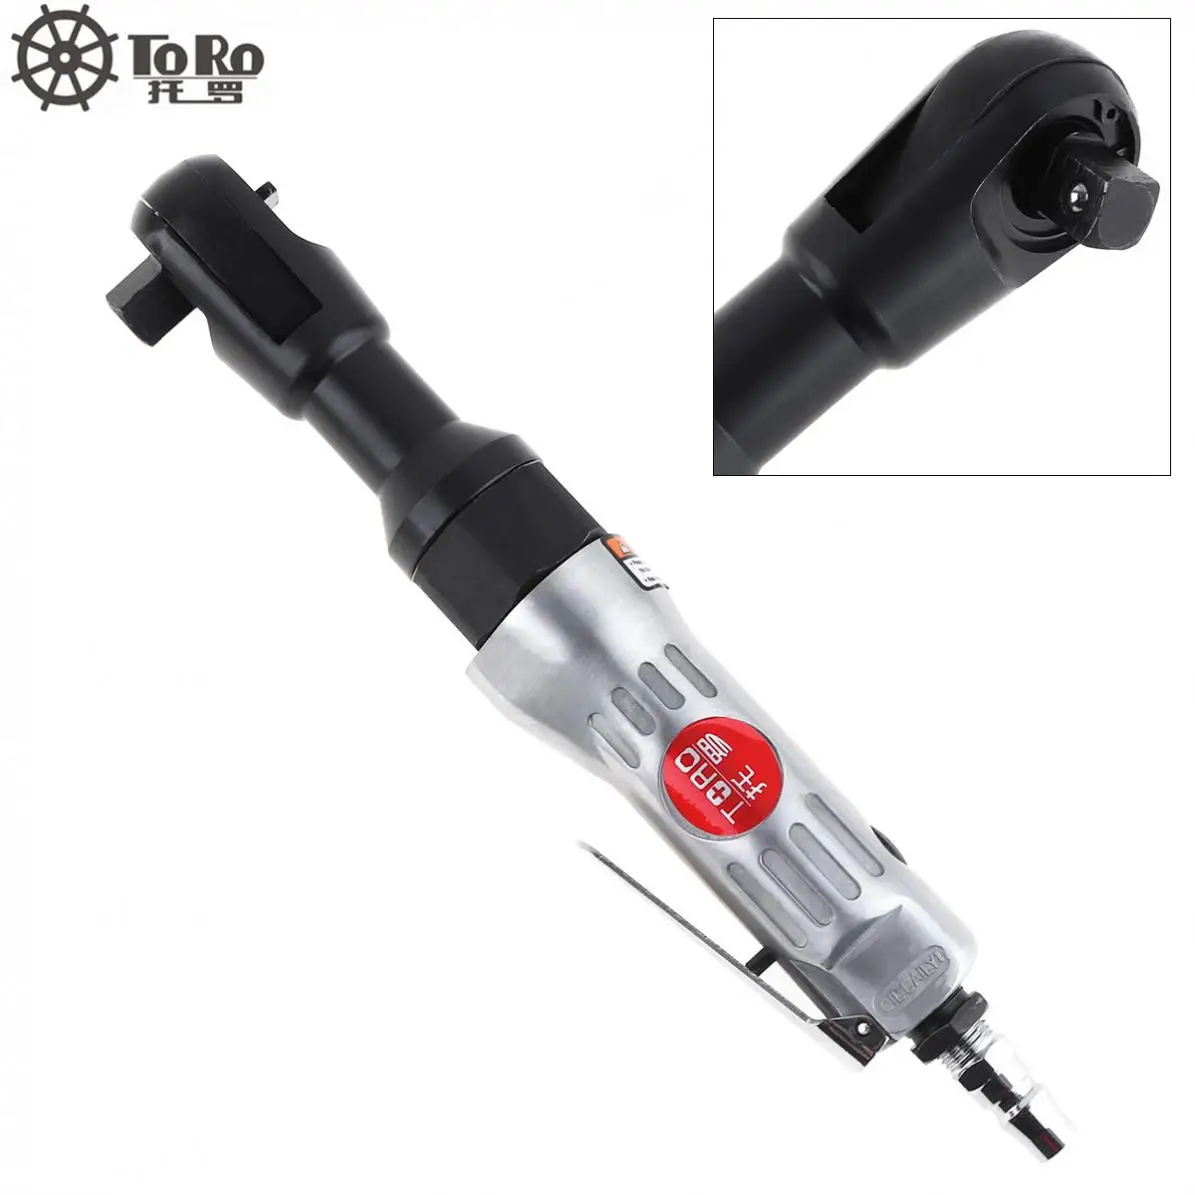 

TORO-2701 1 / 2'' Pneumatic Ratchet Wrench Tools with Air Inlet Interface and Adjustable Switch for Car Repair Disassemble